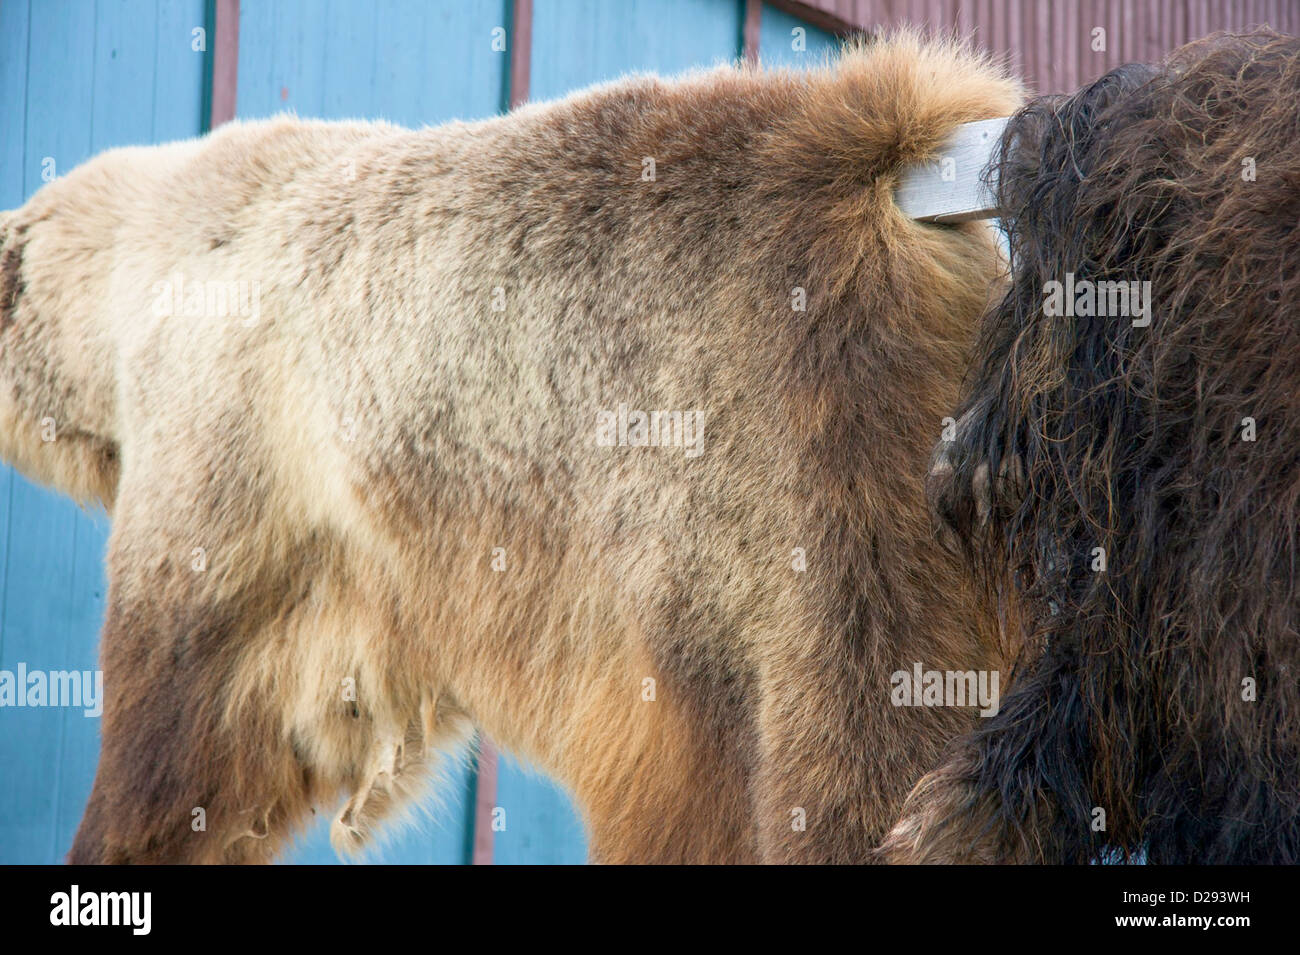 Grizzly And Muskox Skins Drying In Inuit Community Of Gjoa Haven, Nunavut, Arctic Canada Stock Photo